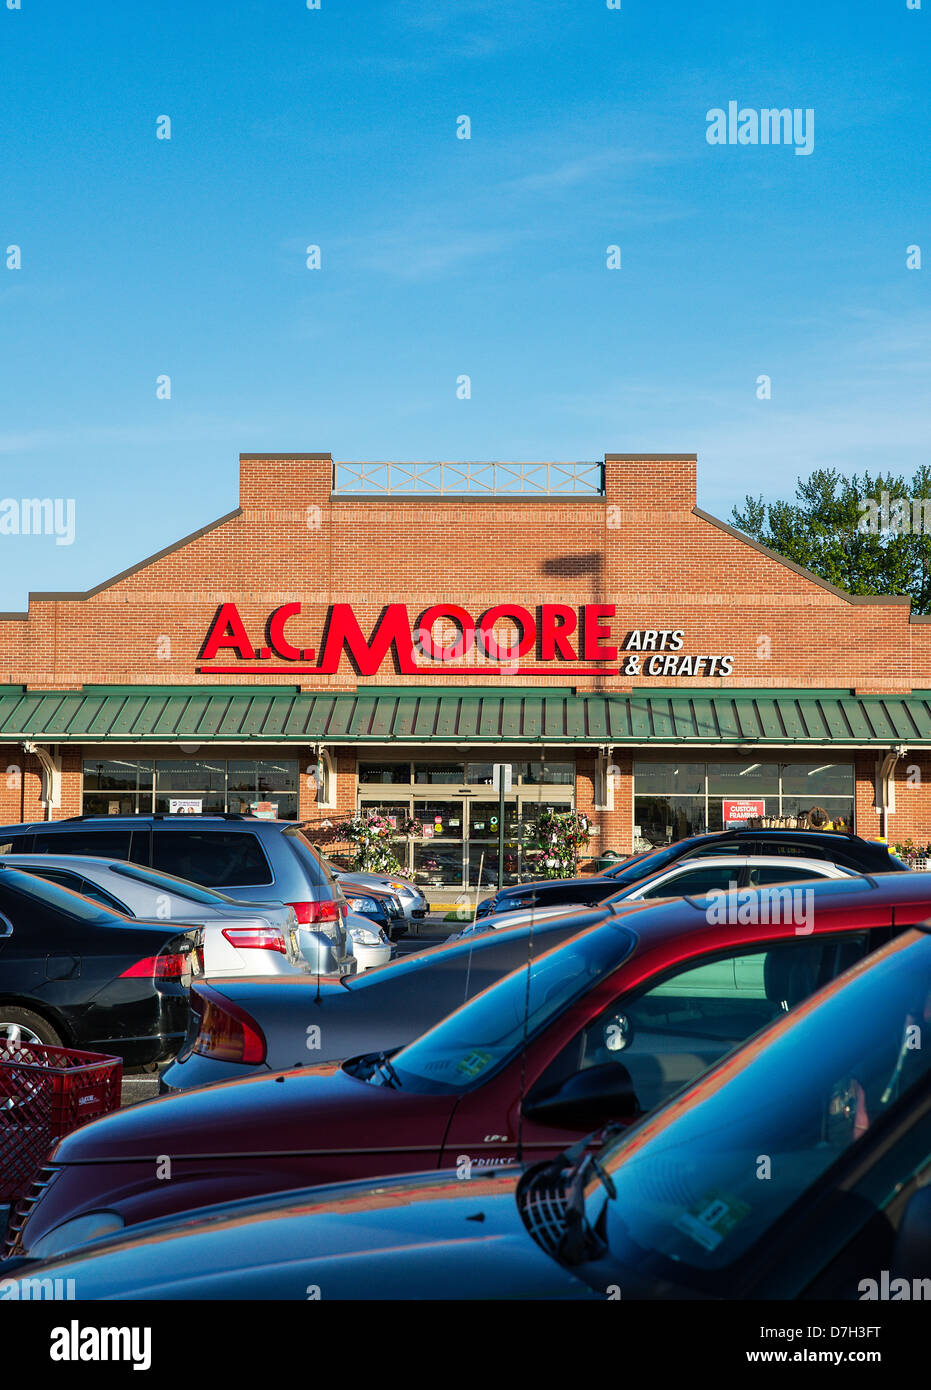 A. C. Moore arts and crafts store, New Jersey, USA Banque D'Images